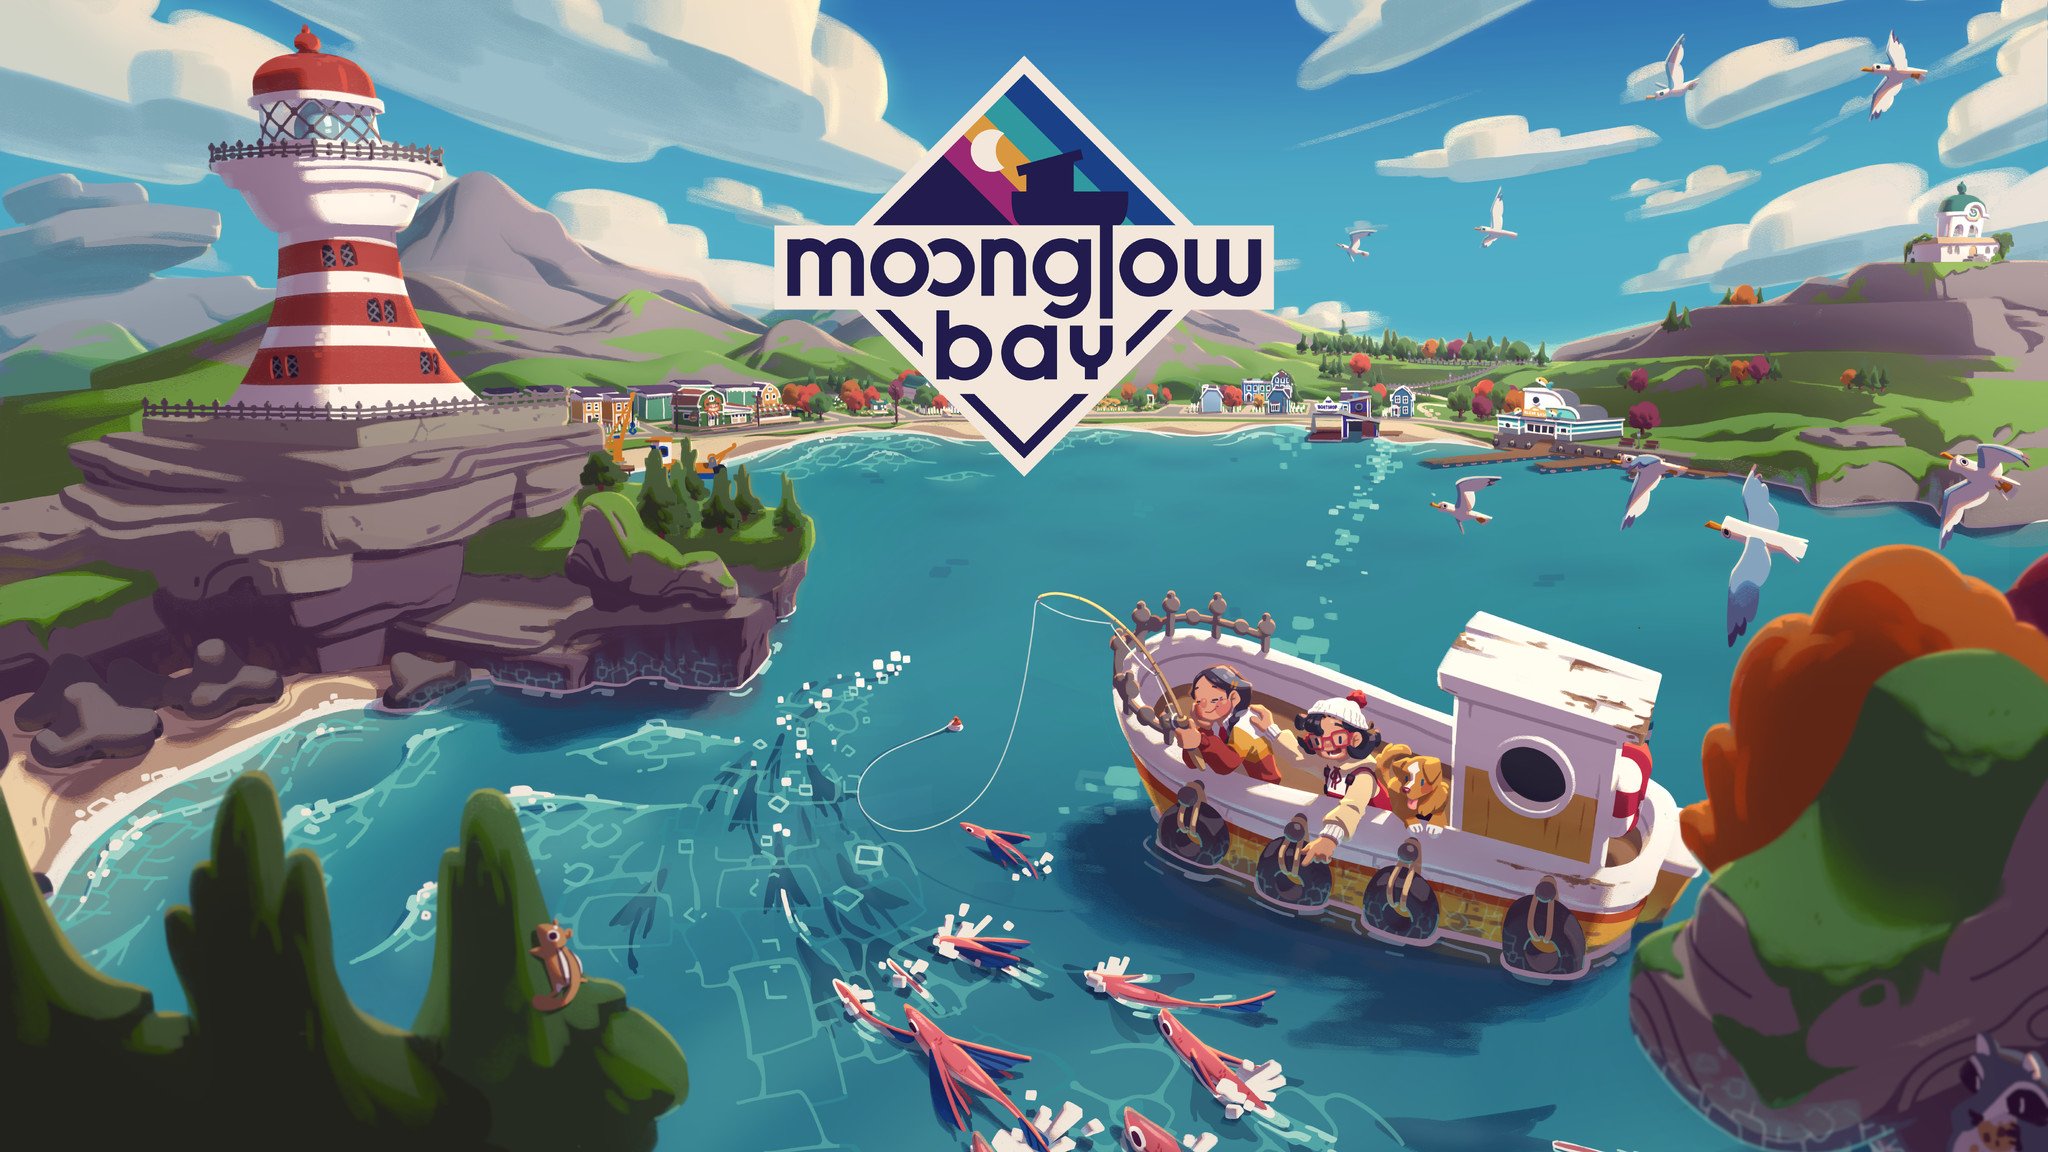 the official art for moonglow bay. it features one of the available player characters, this one an old woman in an orange sweater, fishing on the yellow boat with her daughter. there are moonglow flying fish in the water, seagulls above, and the town of moonglow bay in the distance with the lighthouse closest to them